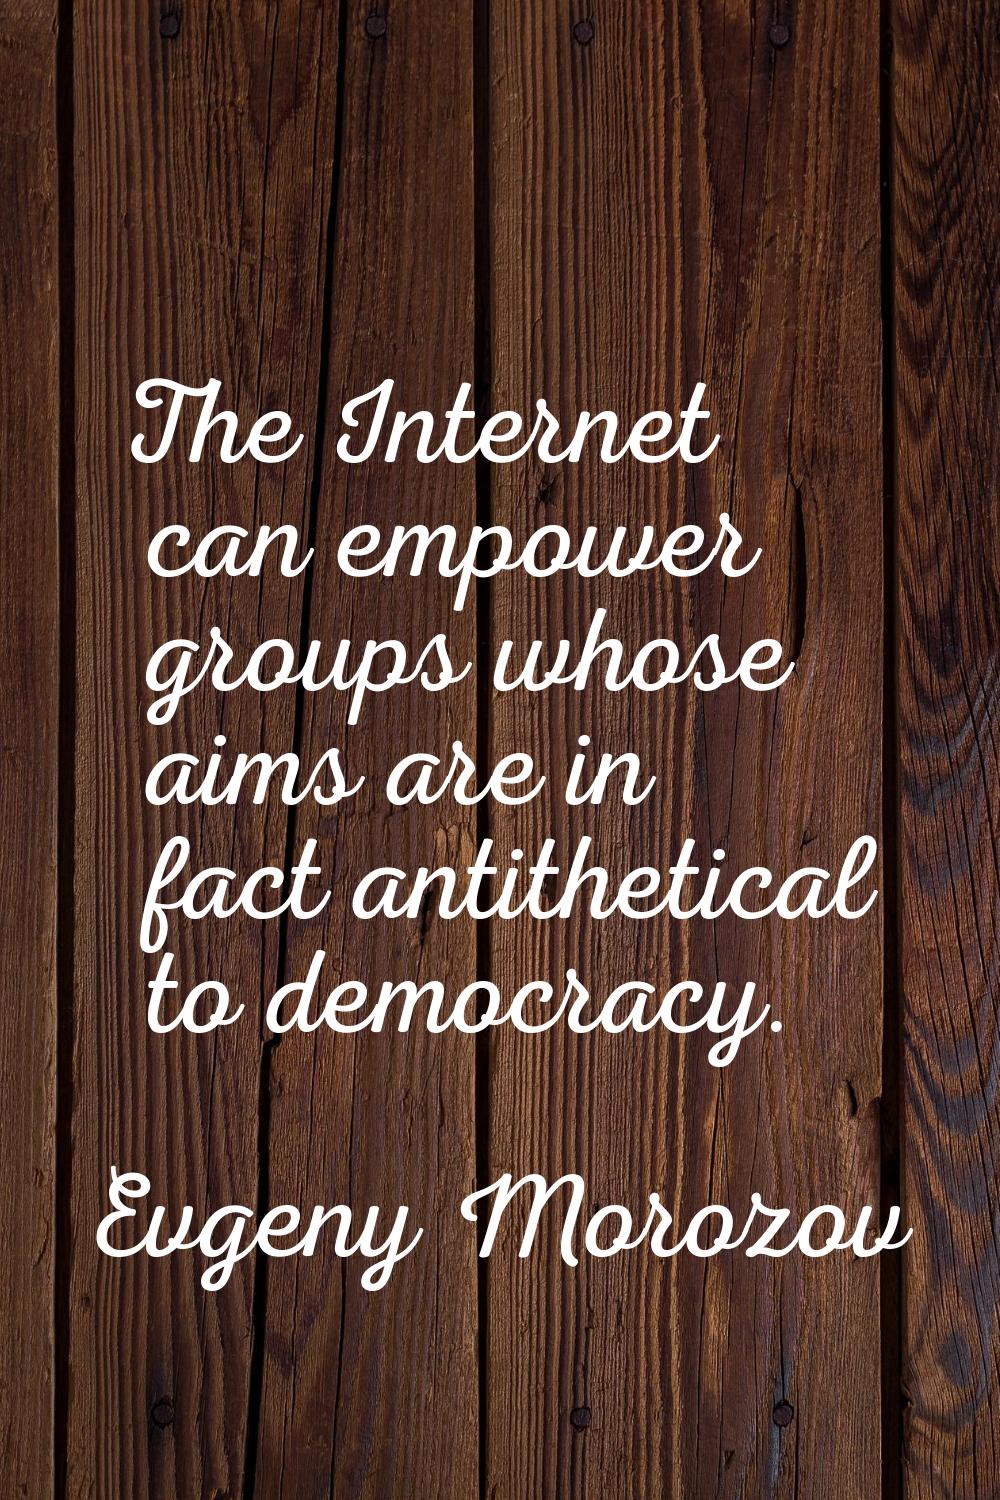 The Internet can empower groups whose aims are in fact antithetical to democracy.